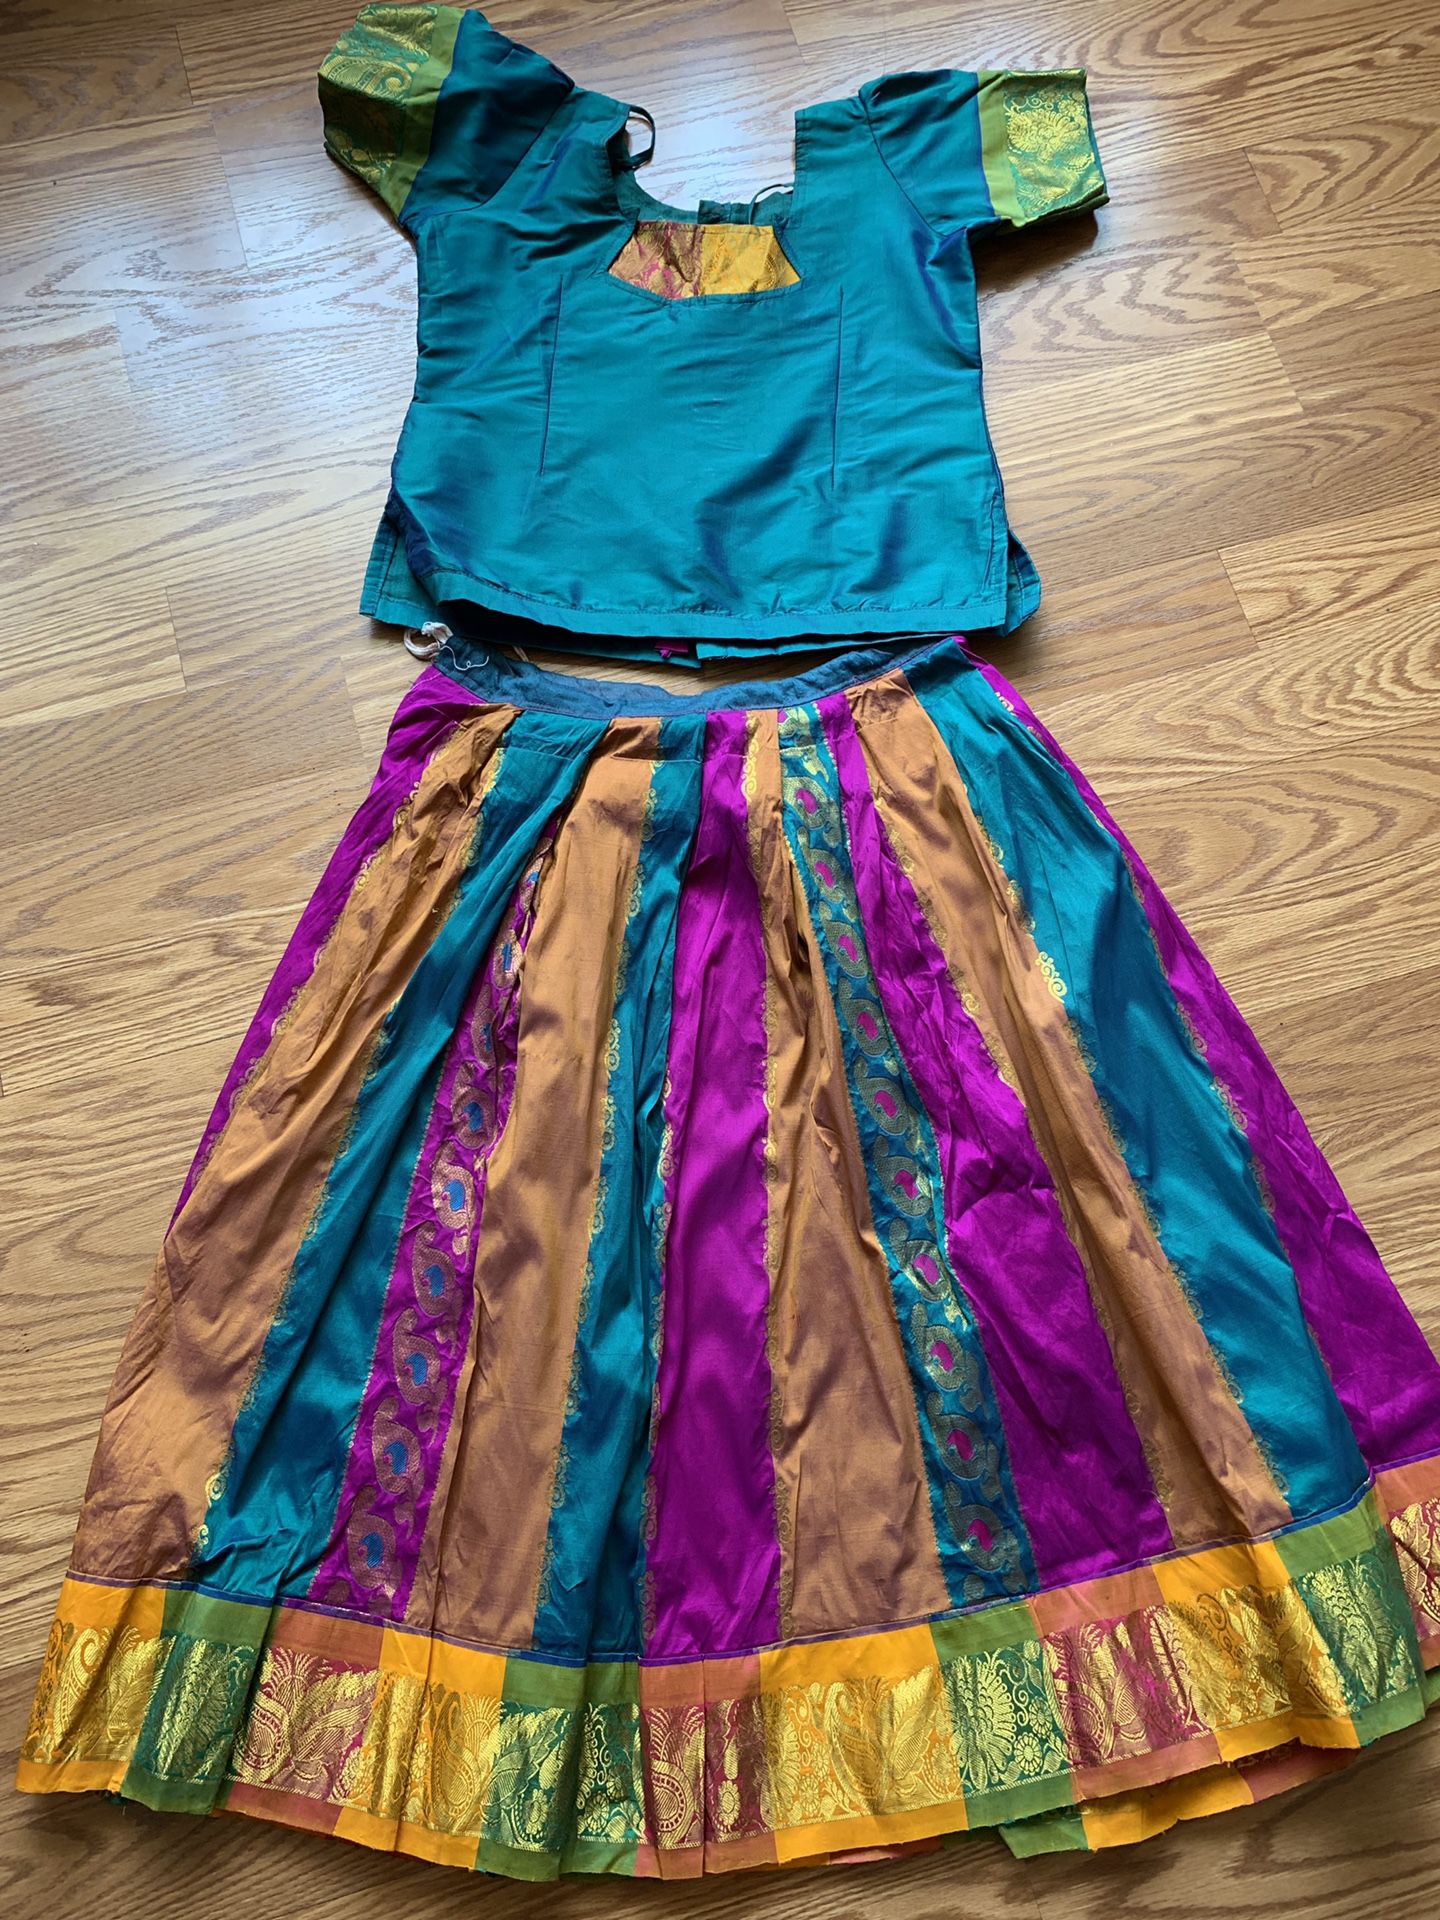 Traditional Indian skirt and blouse